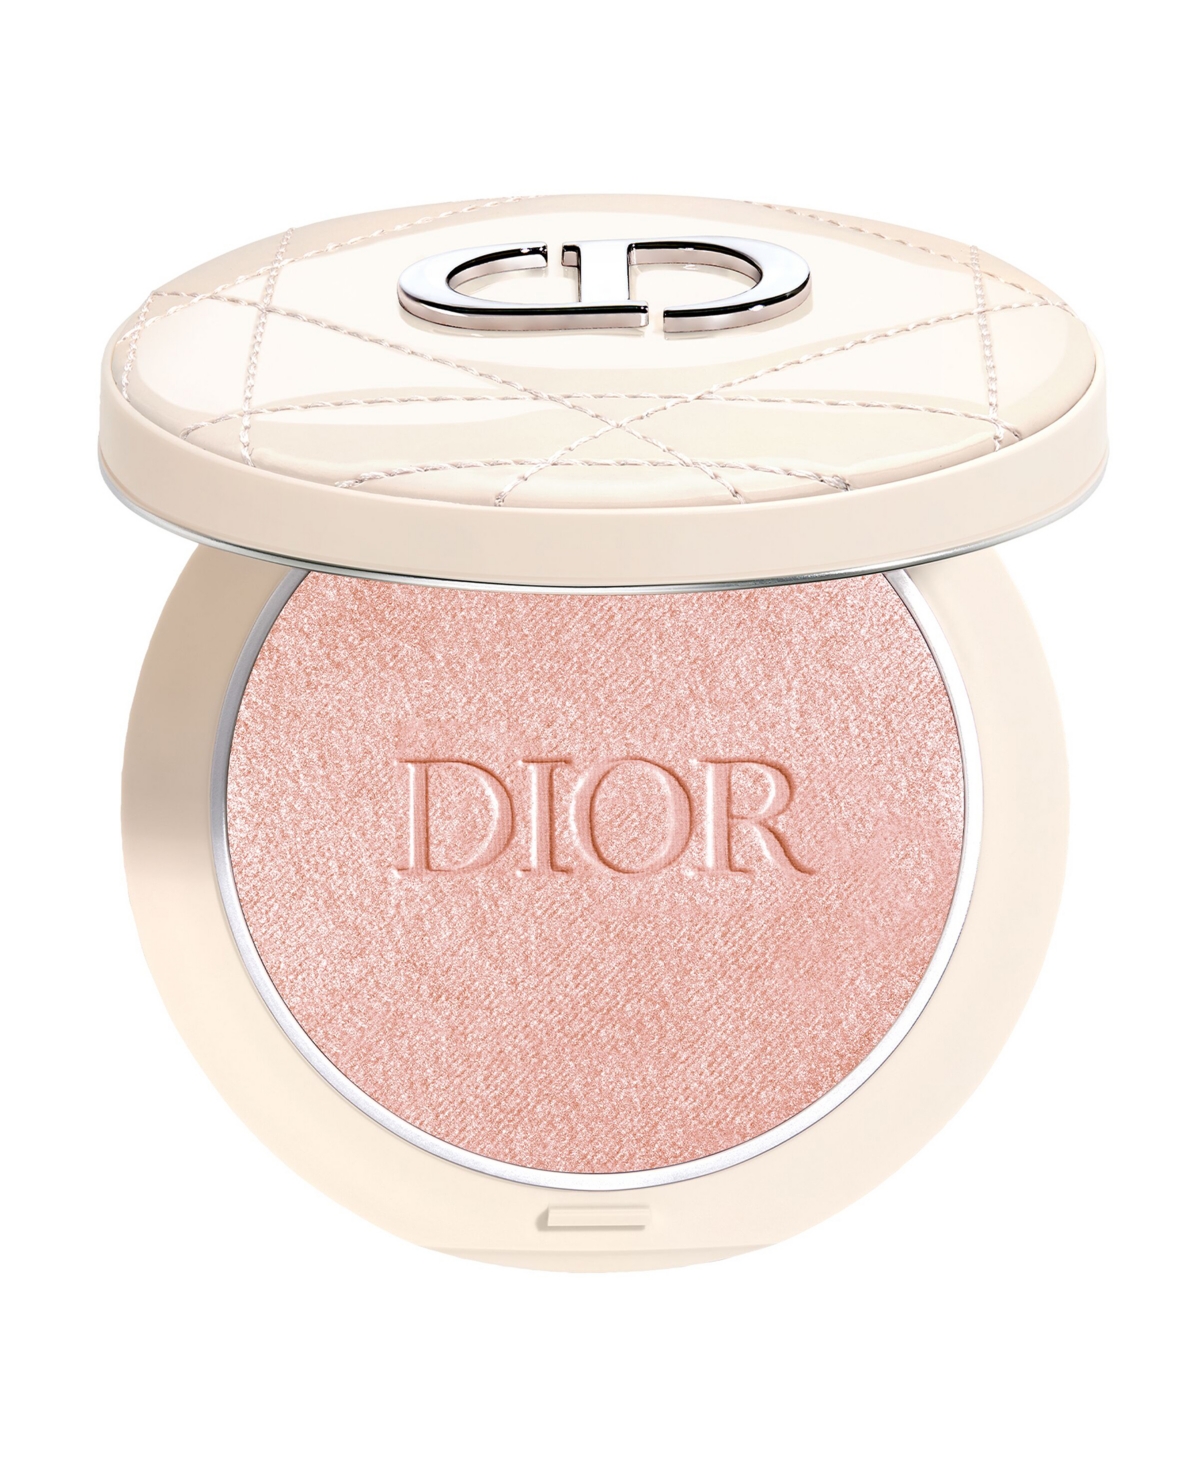 Dior Forever Couture Luminizer Highlighter Powder In Pink Glow